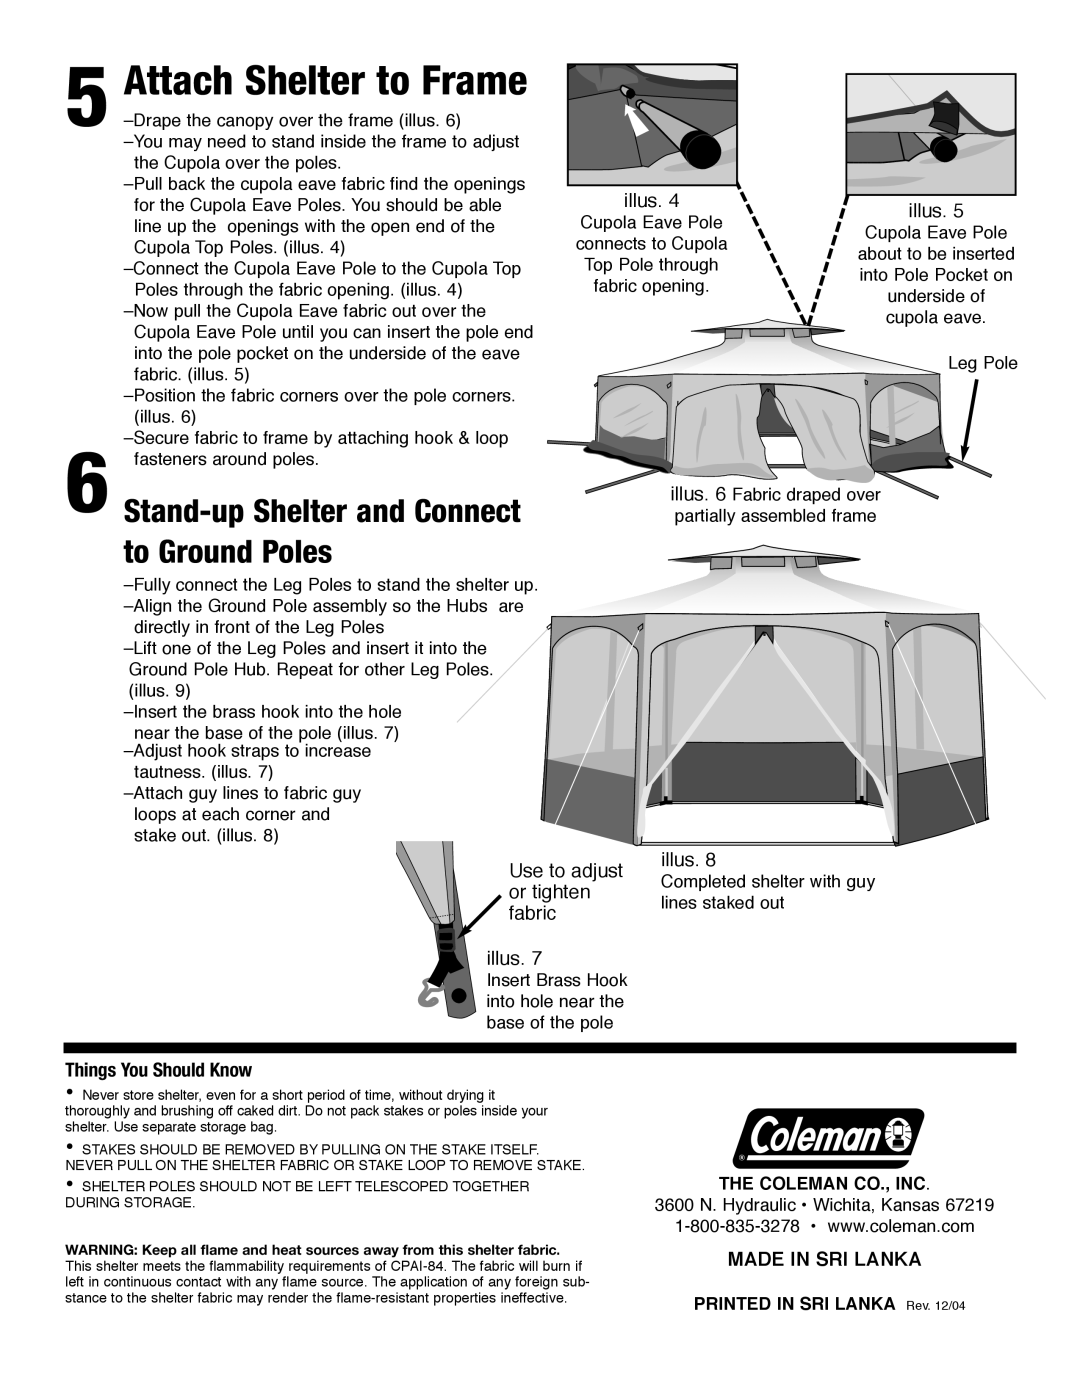 Coleman 14'x12 manual Use to adjust or tighten fabric illus, Attach Shelter to Frame, Things You Should Know 